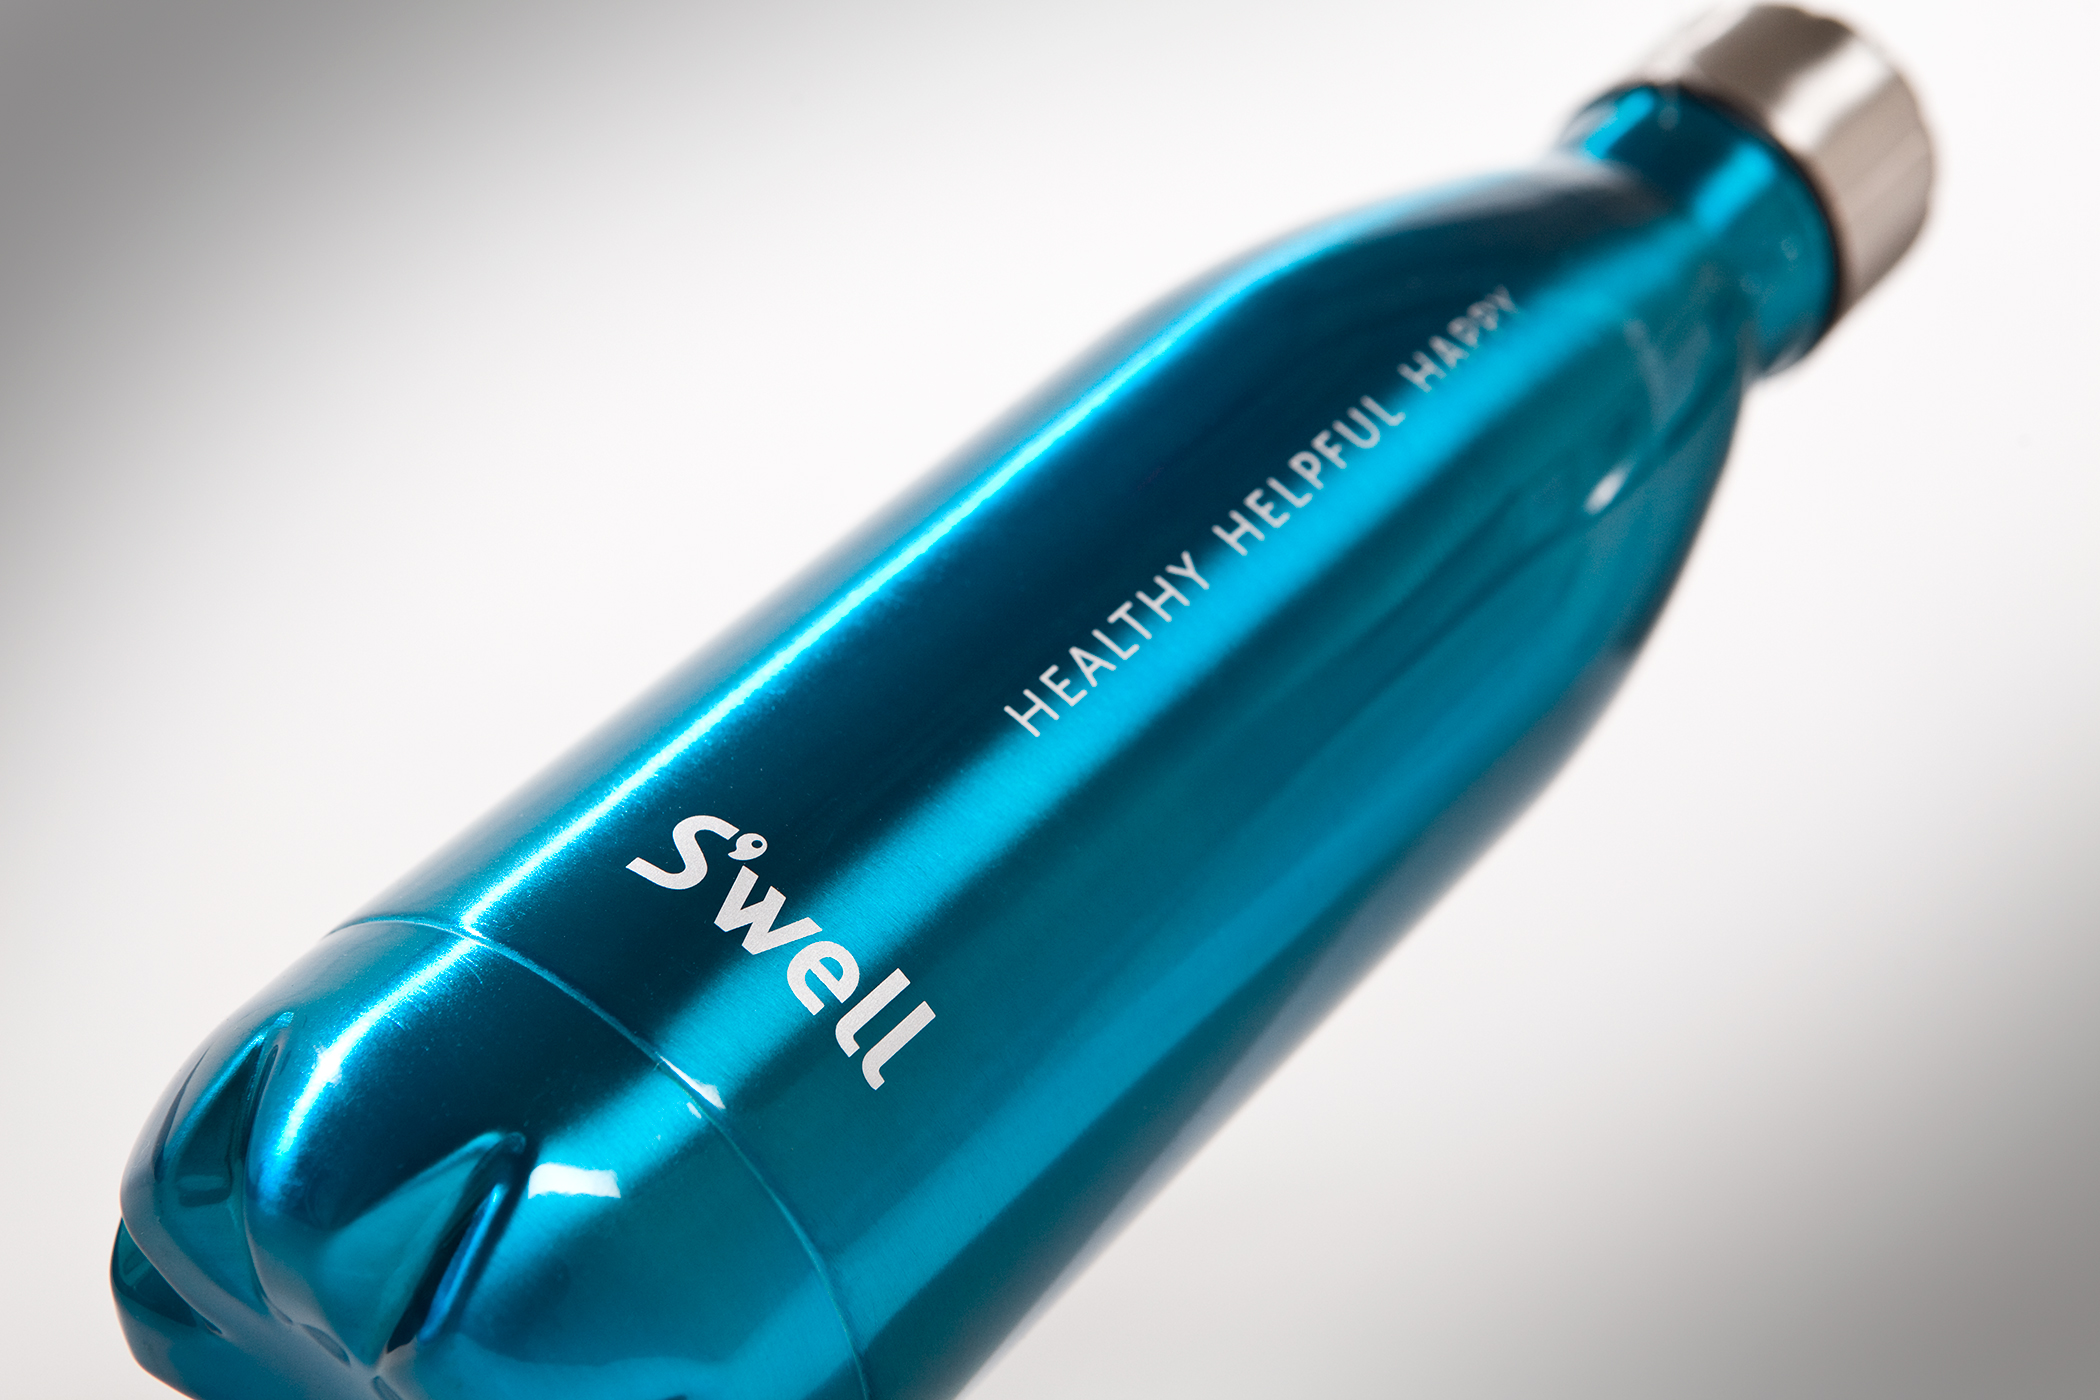 A blue metallic water bottle imprinted with the Swell logo and the phrase "Healthy, helpful, happy."